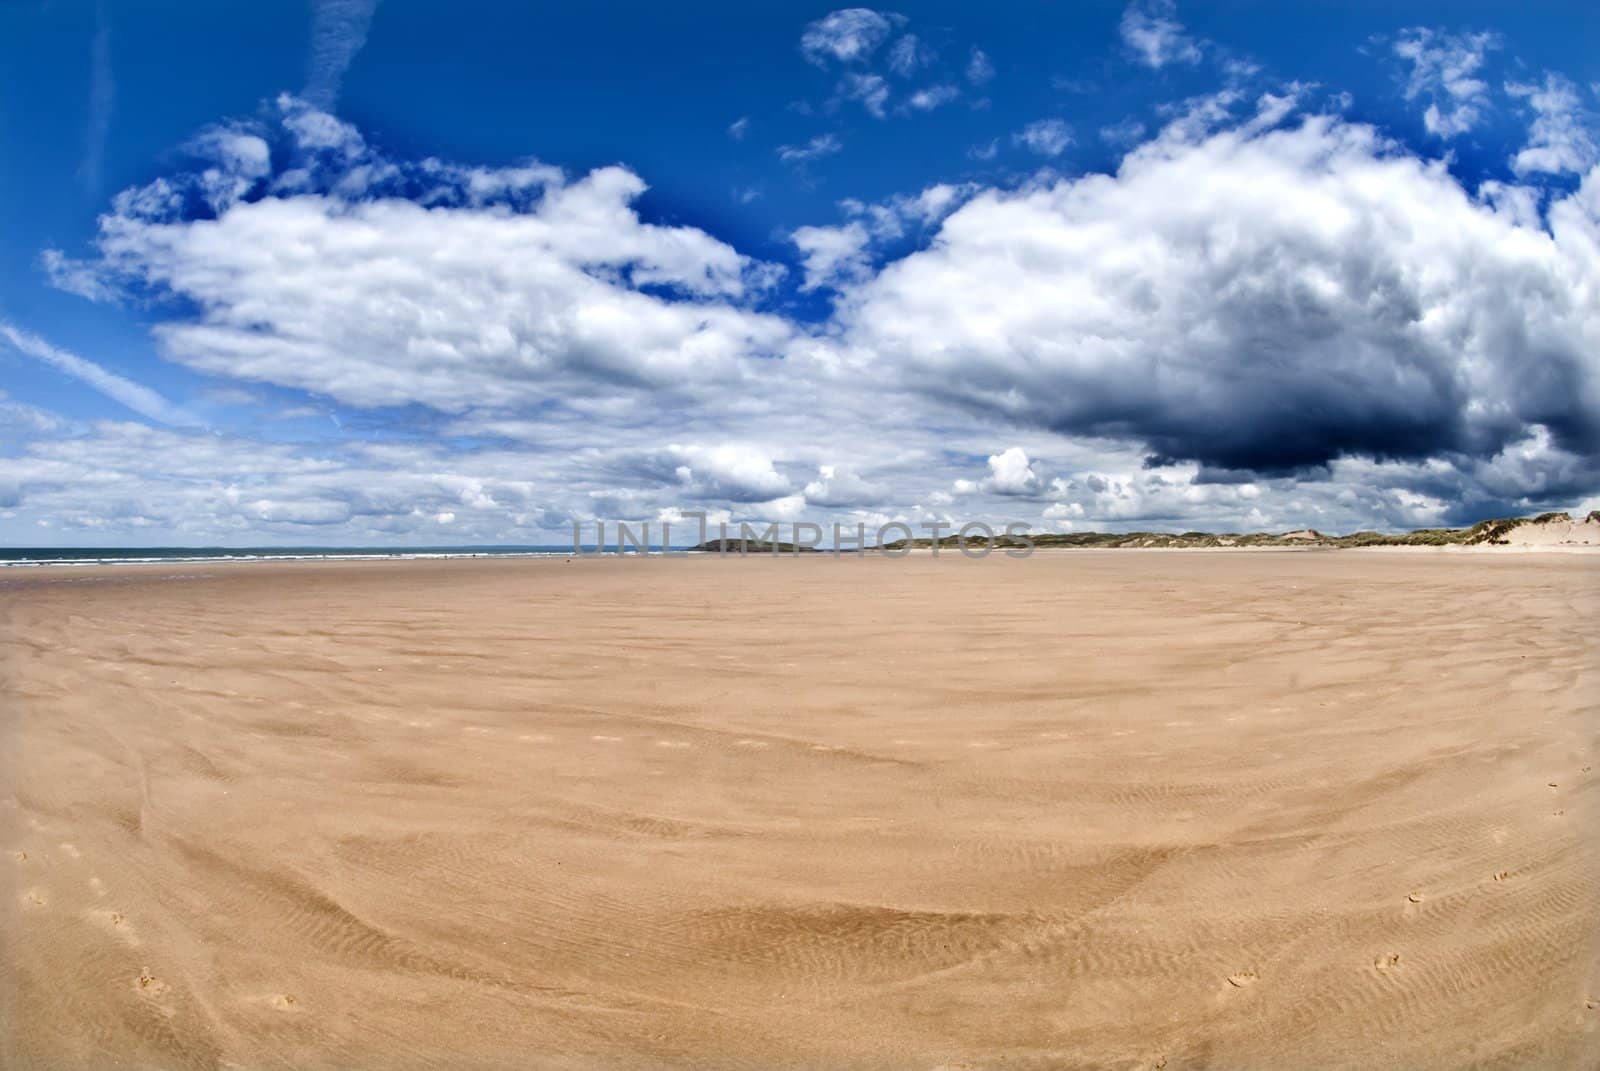 wide empty beach gower wales with blue skies and white clouds by itsrich